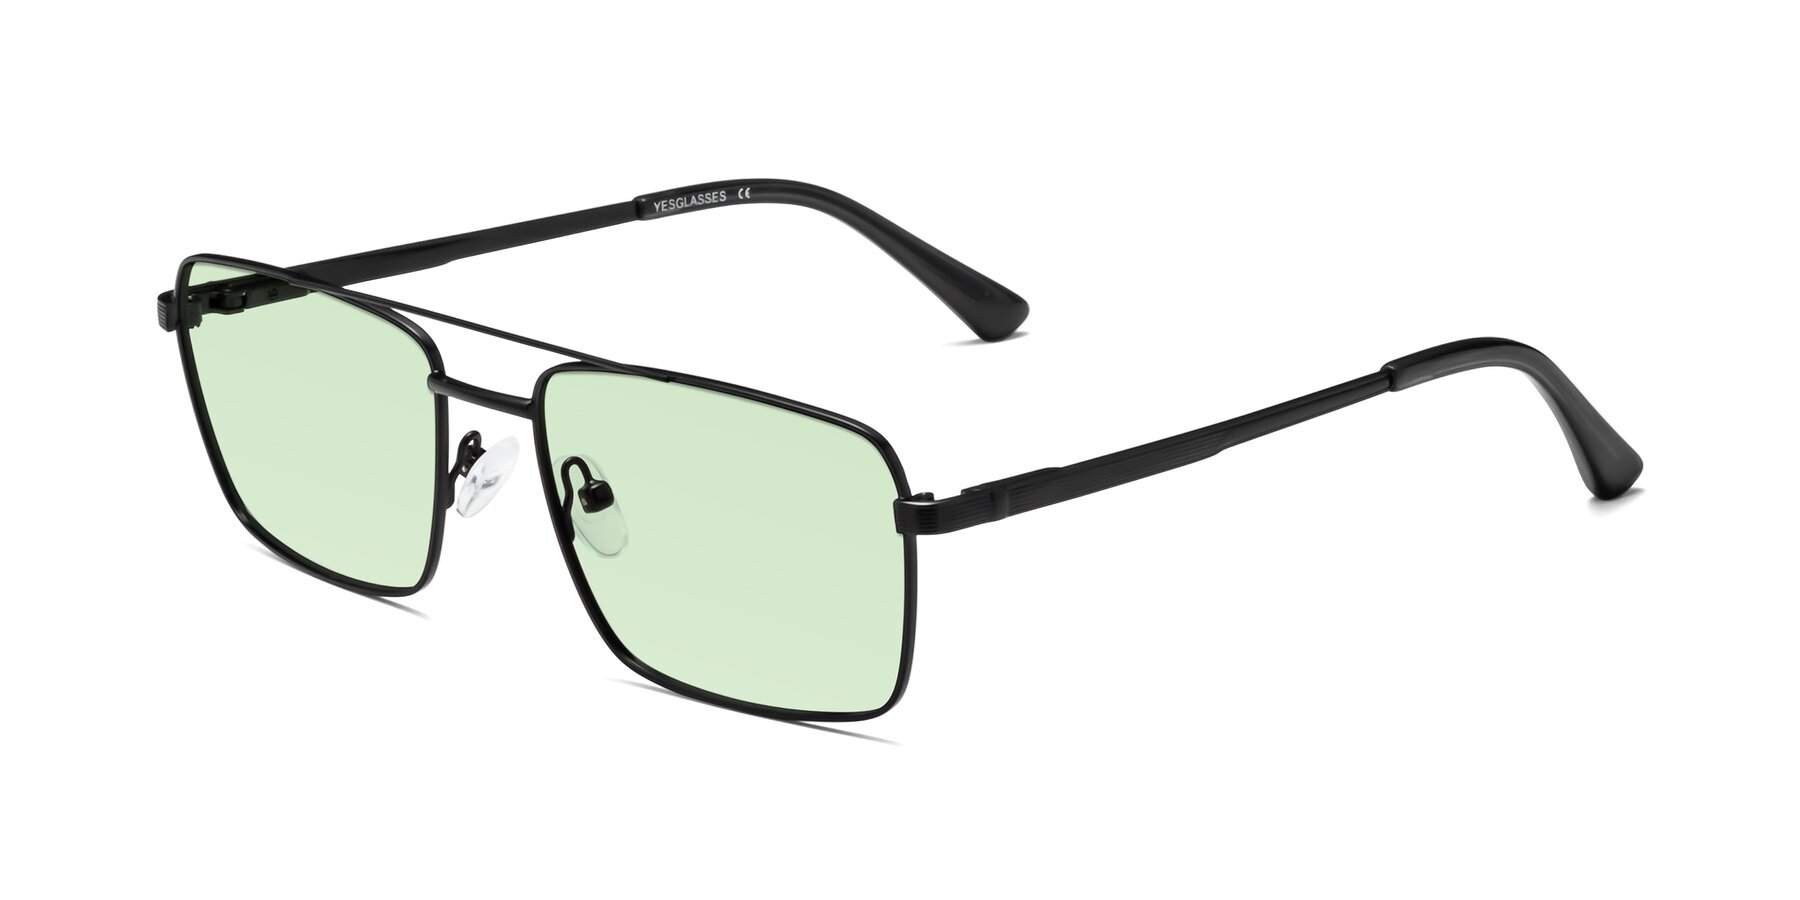 Angle of Beckum in Black with Light Green Tinted Lenses